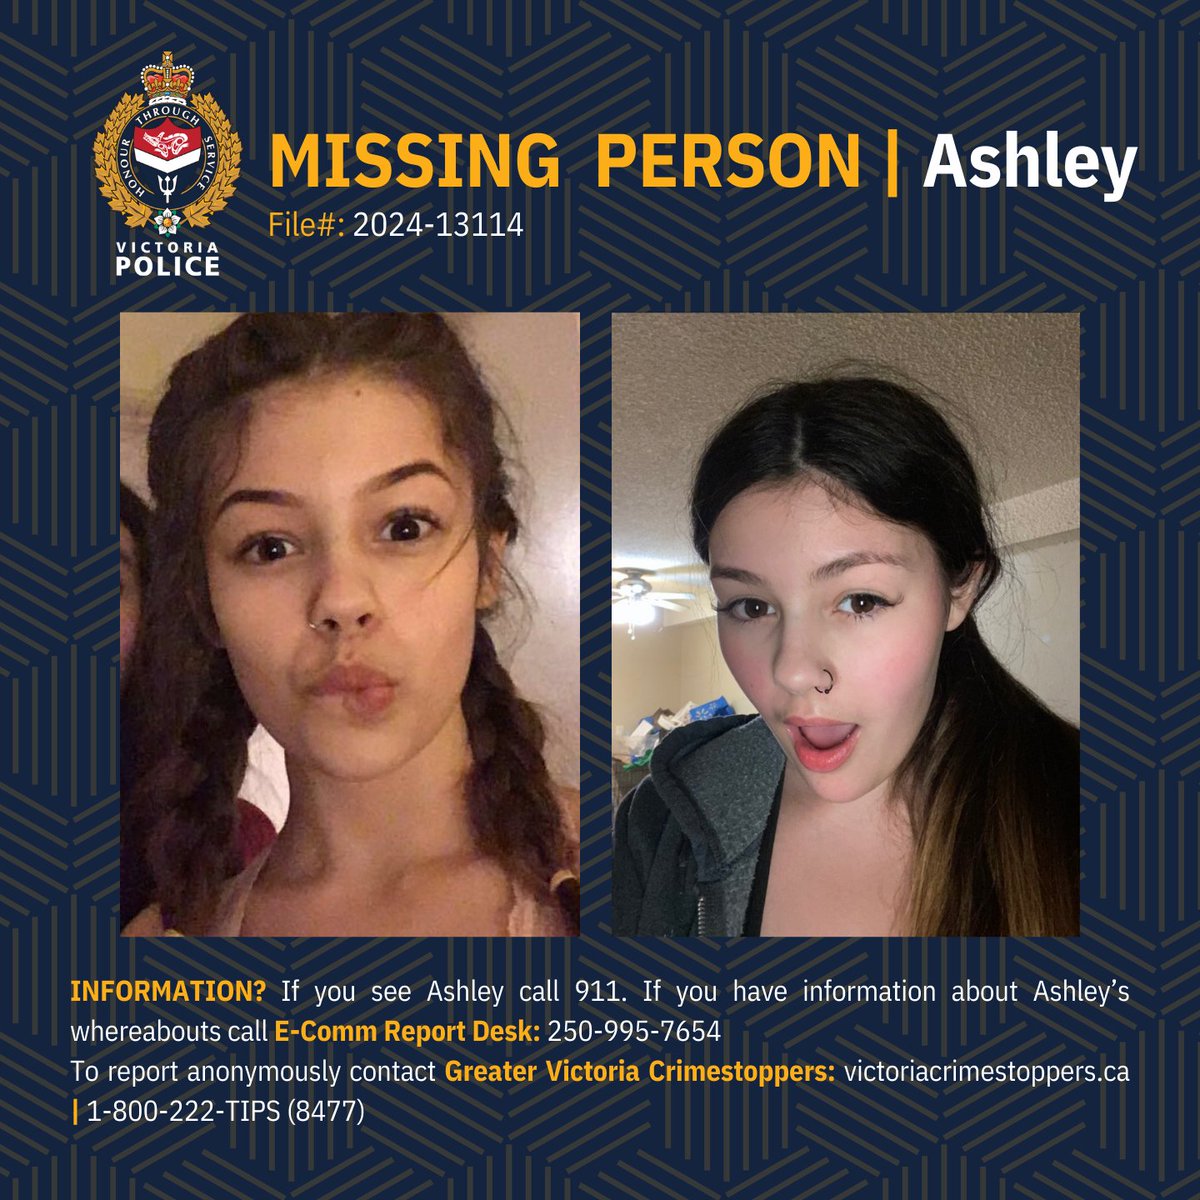 VicPD has issued a #MissingPerson Alert for Ashley. Last seen on March 20th, Ashley is described as a 20 year old Caucasian female standing five feet seven inches tall, with a slim build, brown hair and has a nose piercing. Ashley was reported missing on April 17.

#yyj